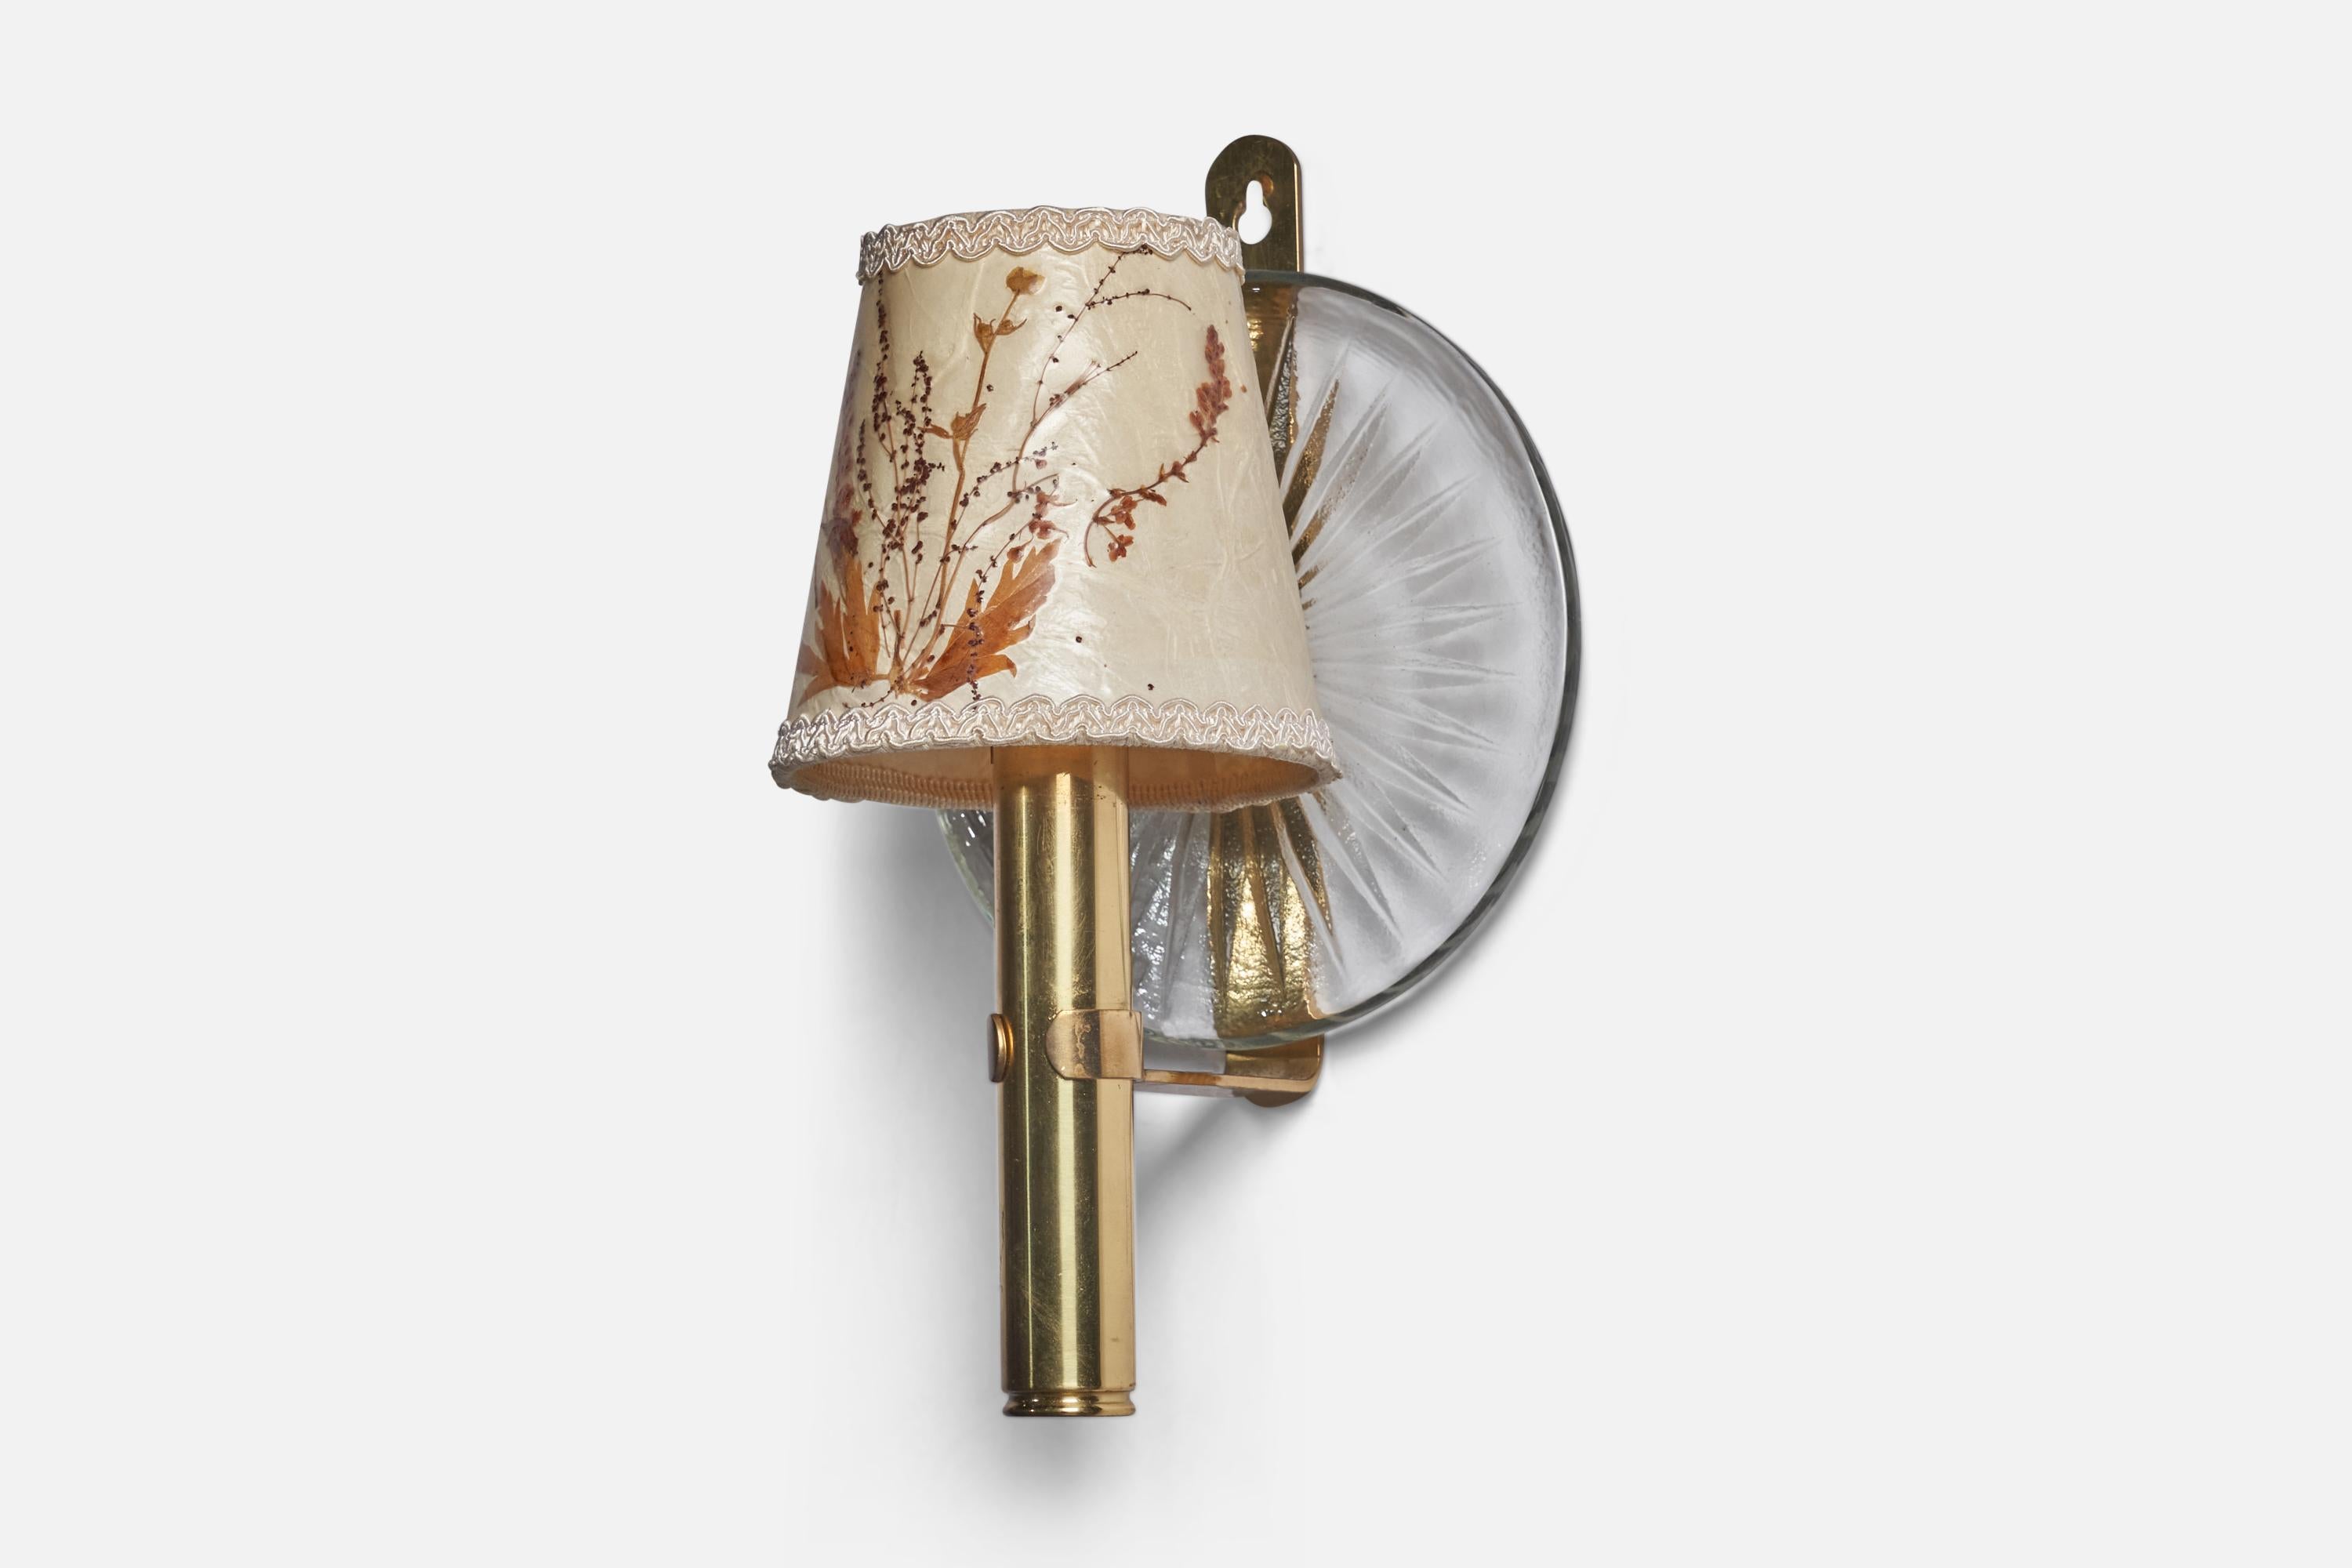 A glass, brass, paper and laminated plants wall light designed and produced in Sweden, 1940s.

Overall Dimensions (inches): 12